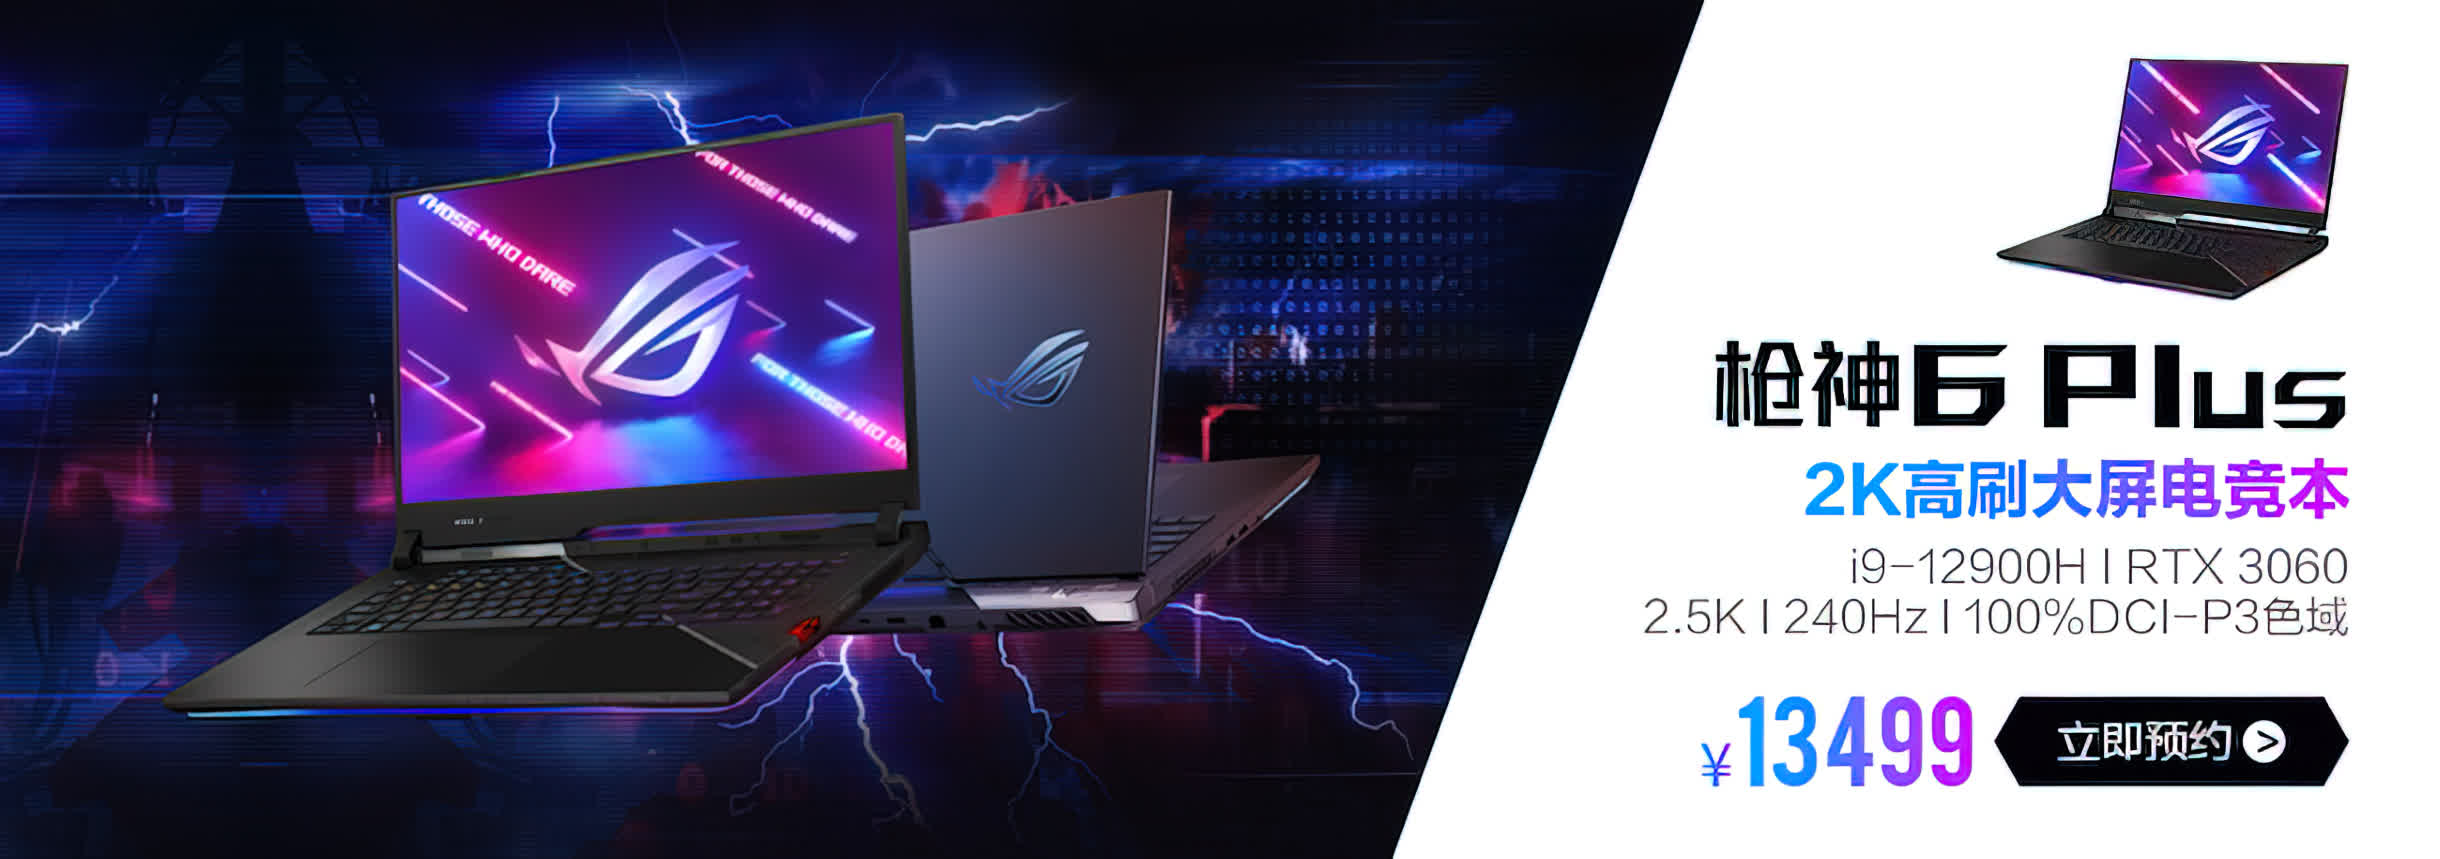 New Asus ROG Strix Scar gaming laptop to feature Intel Alder Lake-HX CPU overclocked to 5.2 GHz